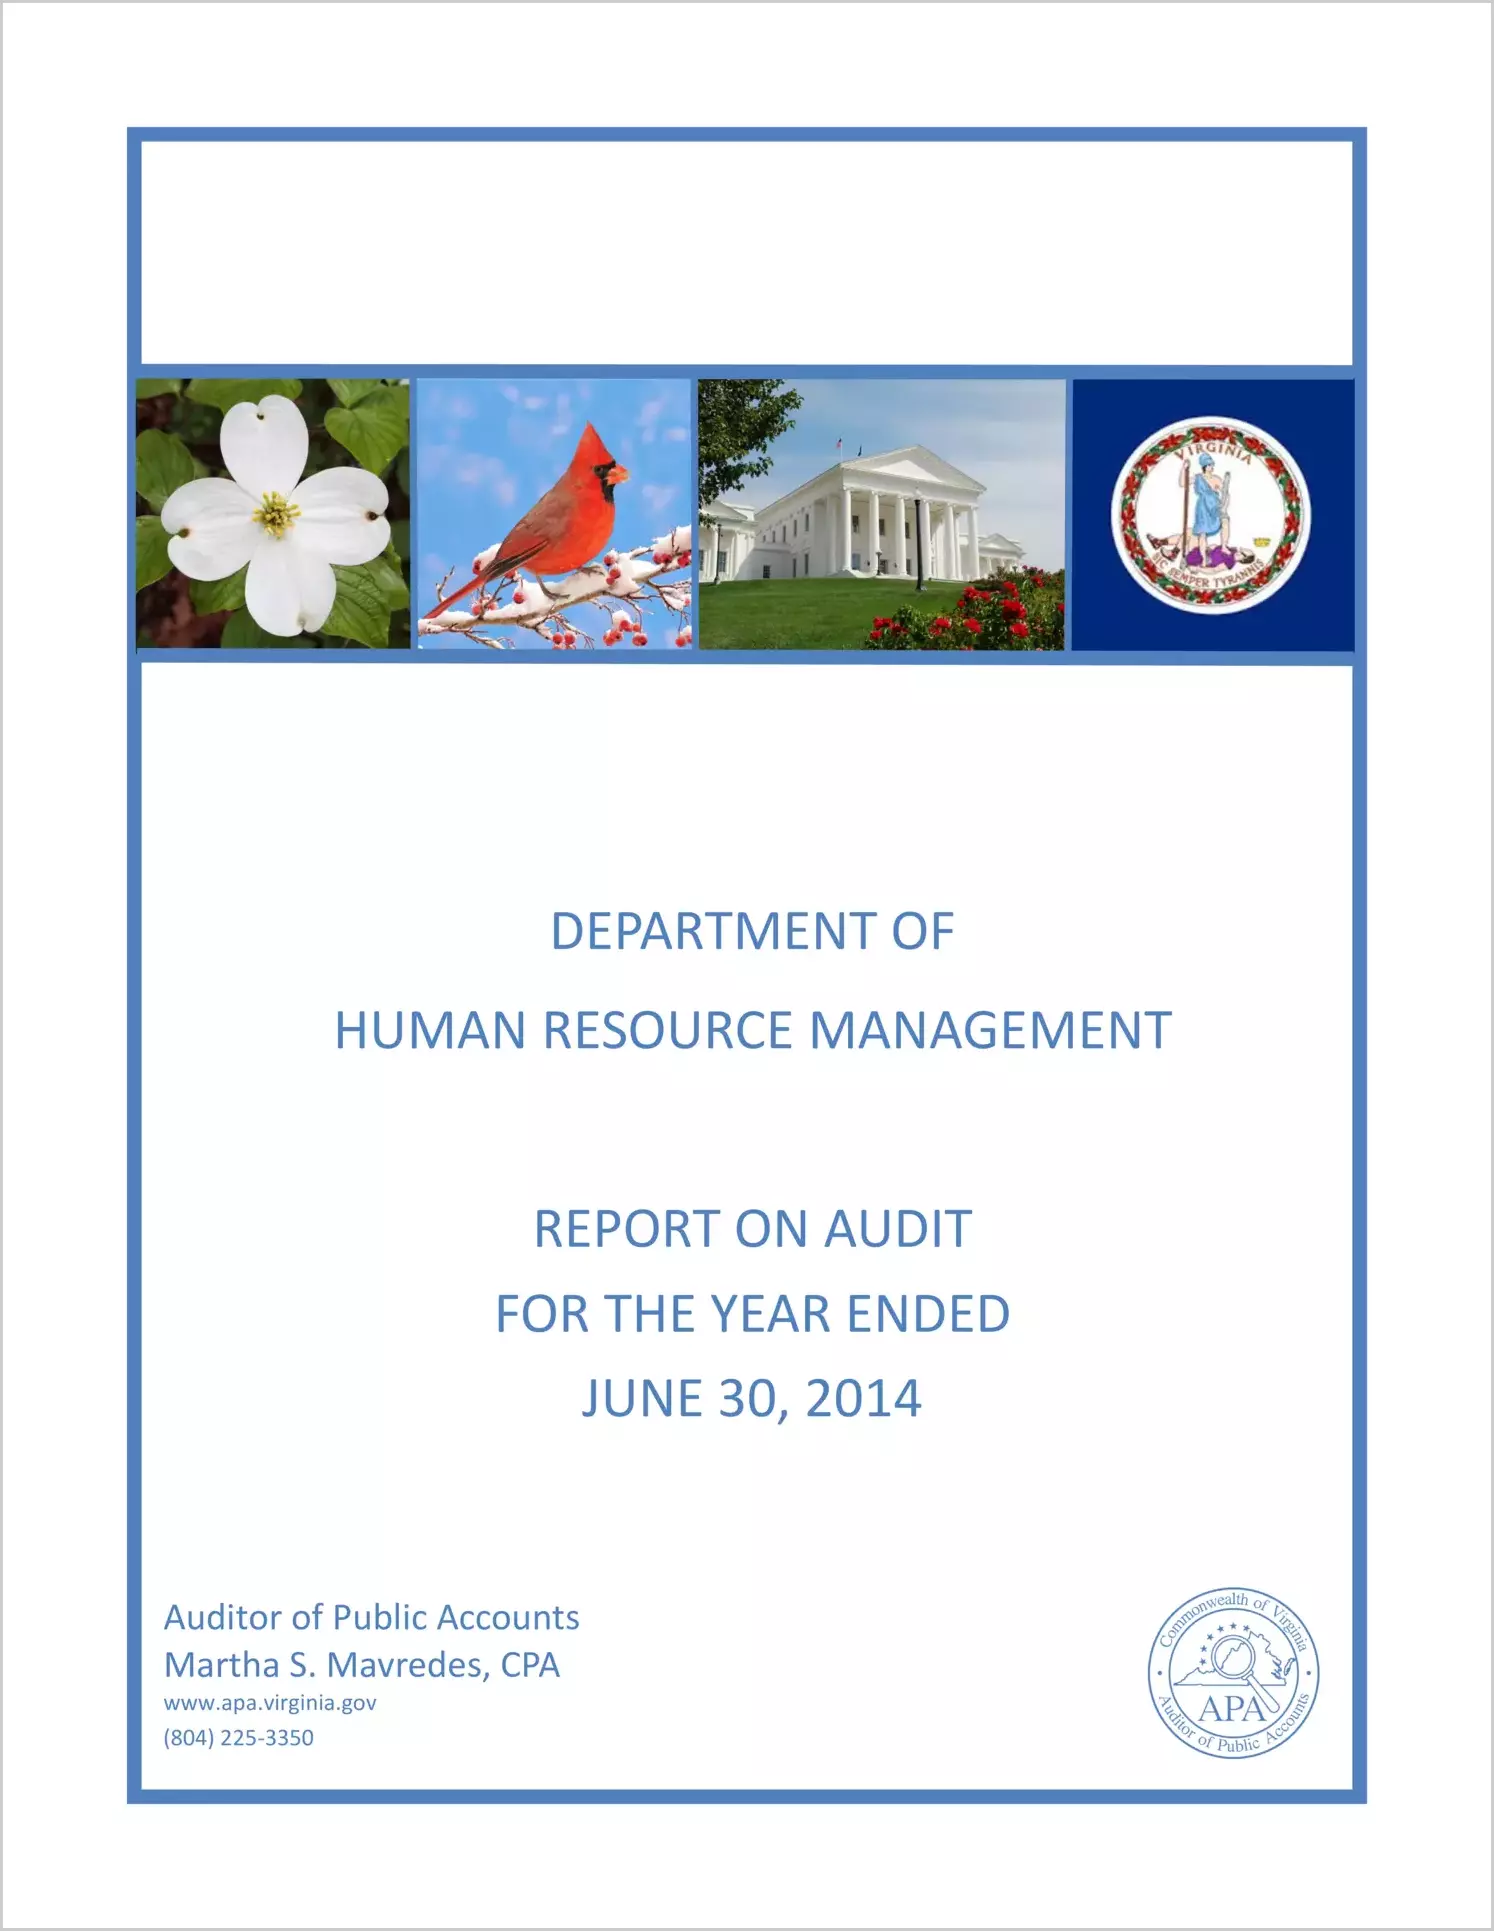 Department of Human Resource Management for the fiscal year ended June 30, 2014